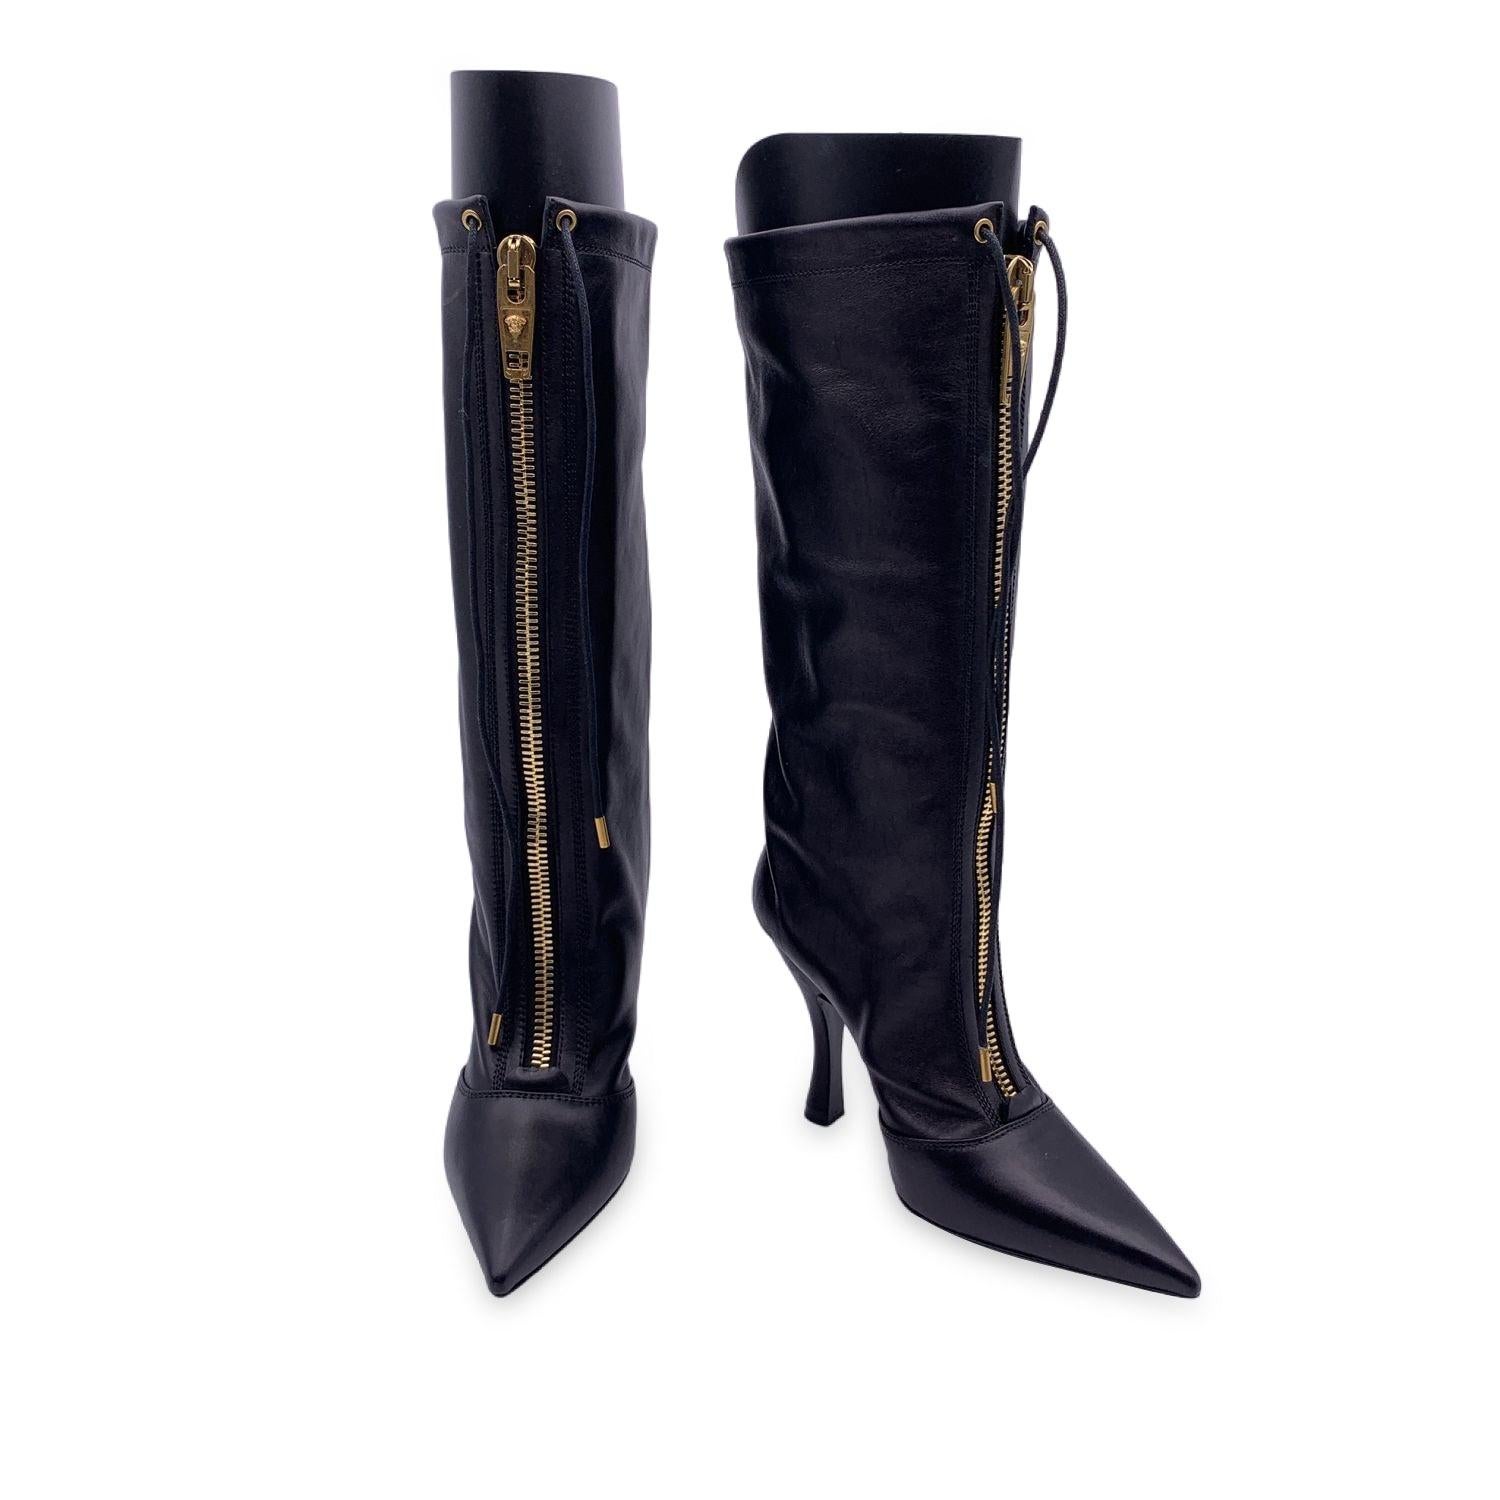 Versace black leather 3/4 length boot. It features gold metal central zip and a lace fastening. Pointed toes. Covered heels. heels height: 10.5 cm. Size: EU 36 (The size shown for this item is the size indicated by the designer on the shoes). Made